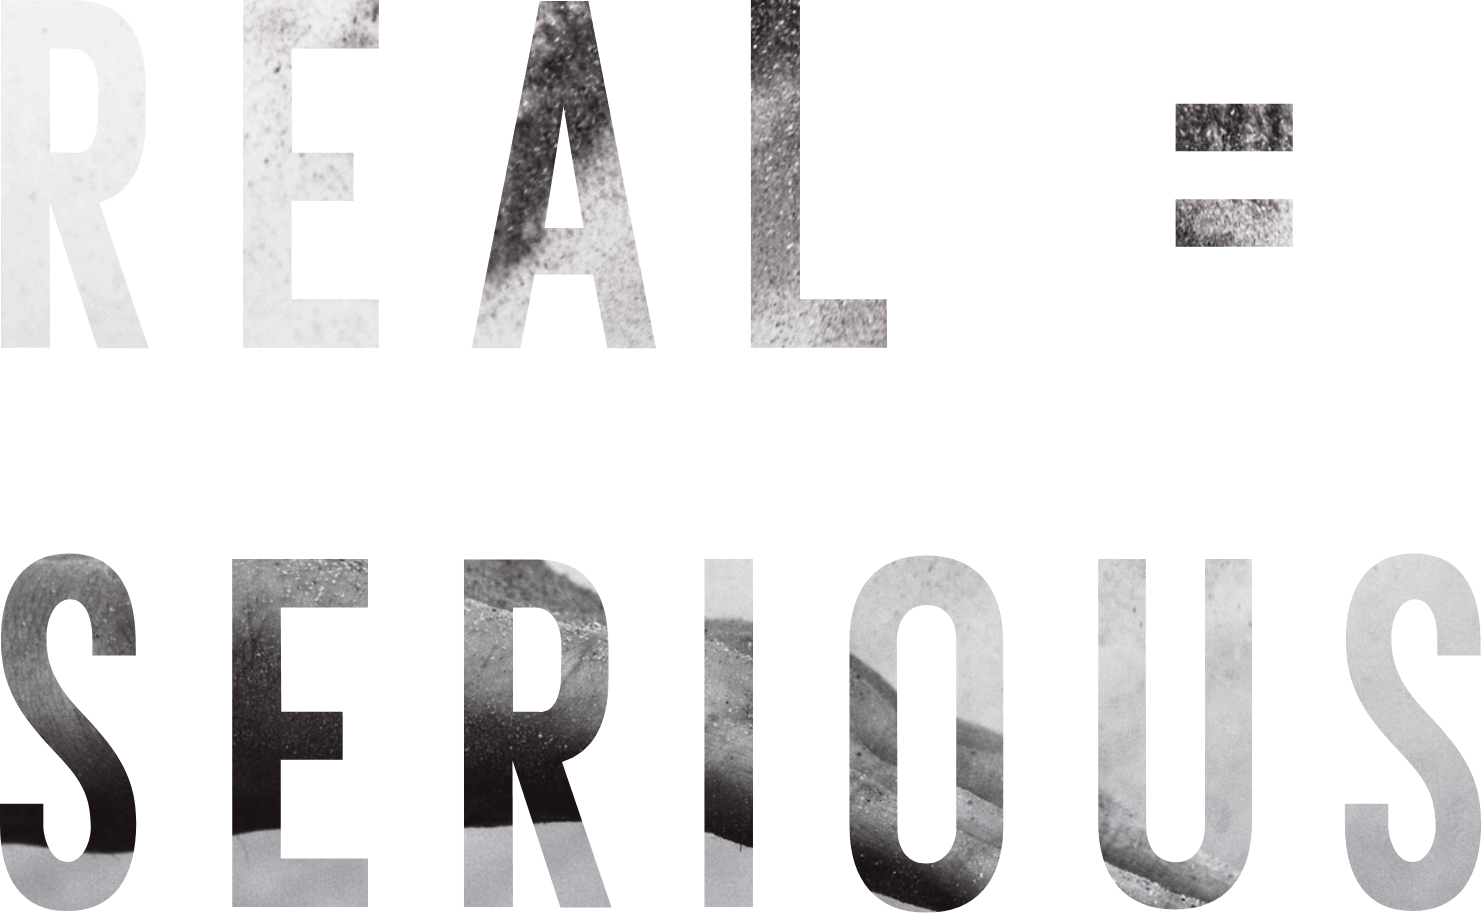 Real = Serious